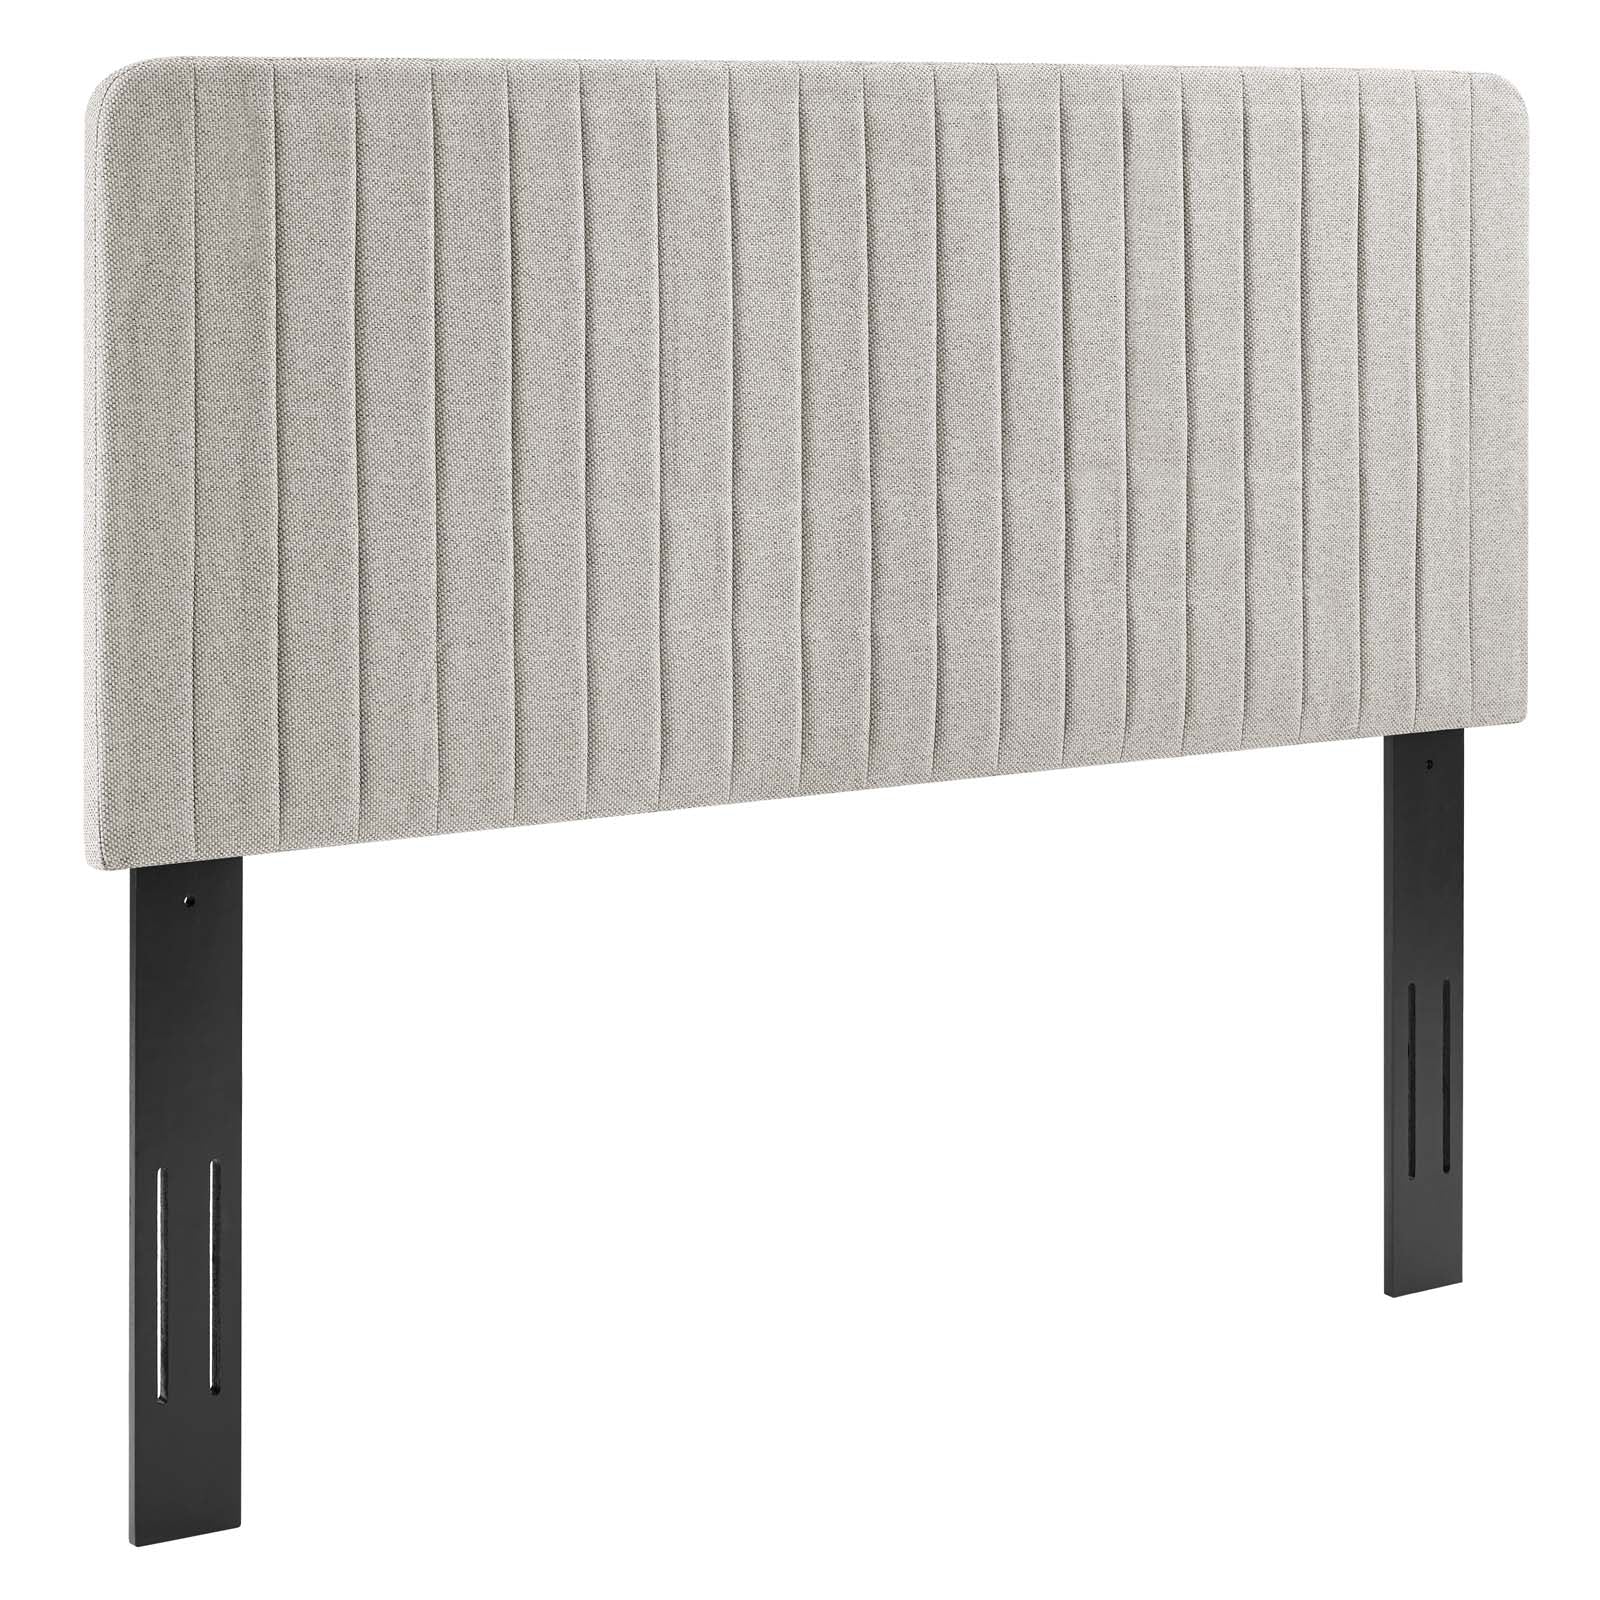 Milenna Channel Tufted Upholstered Fabric Headboard - East Shore Modern Home Furnishings